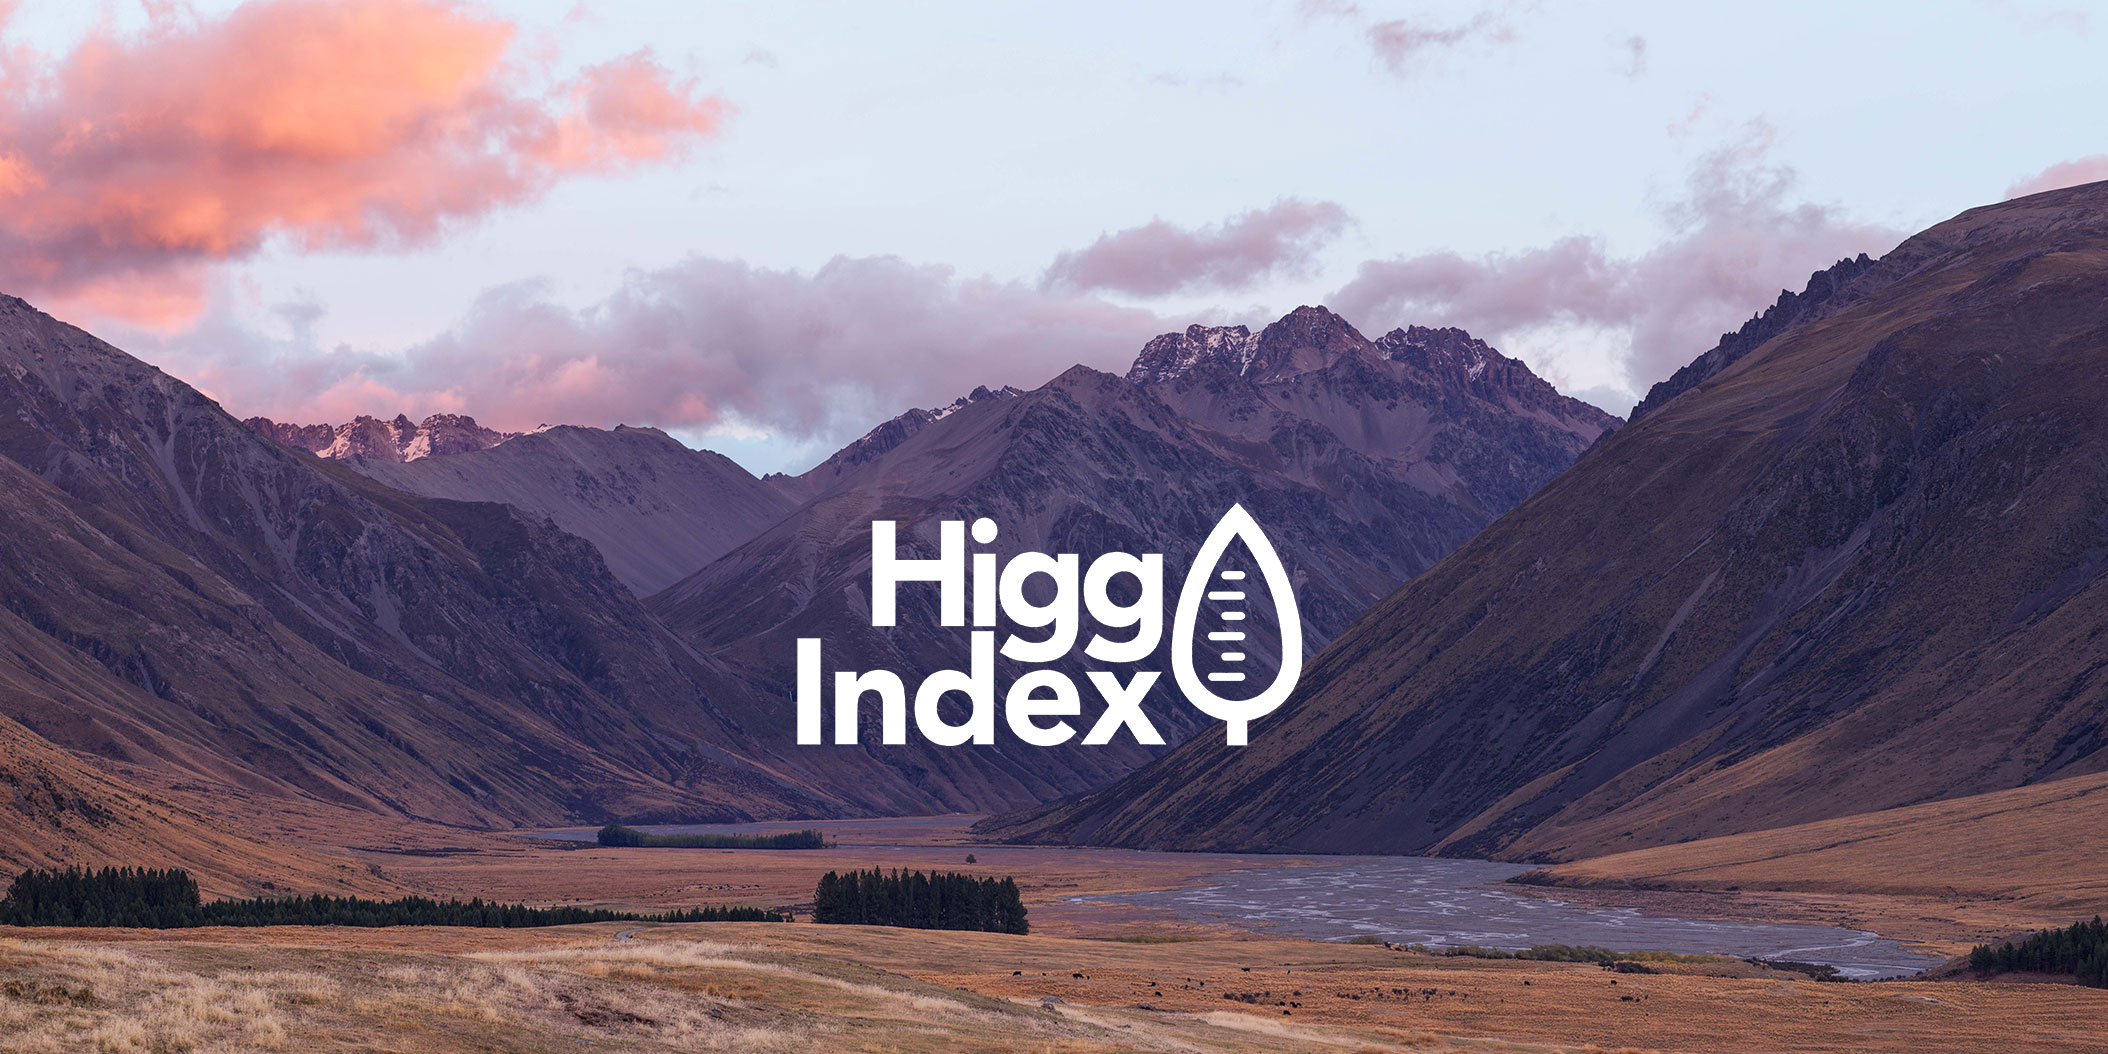 Higg Index logo with mountains in background